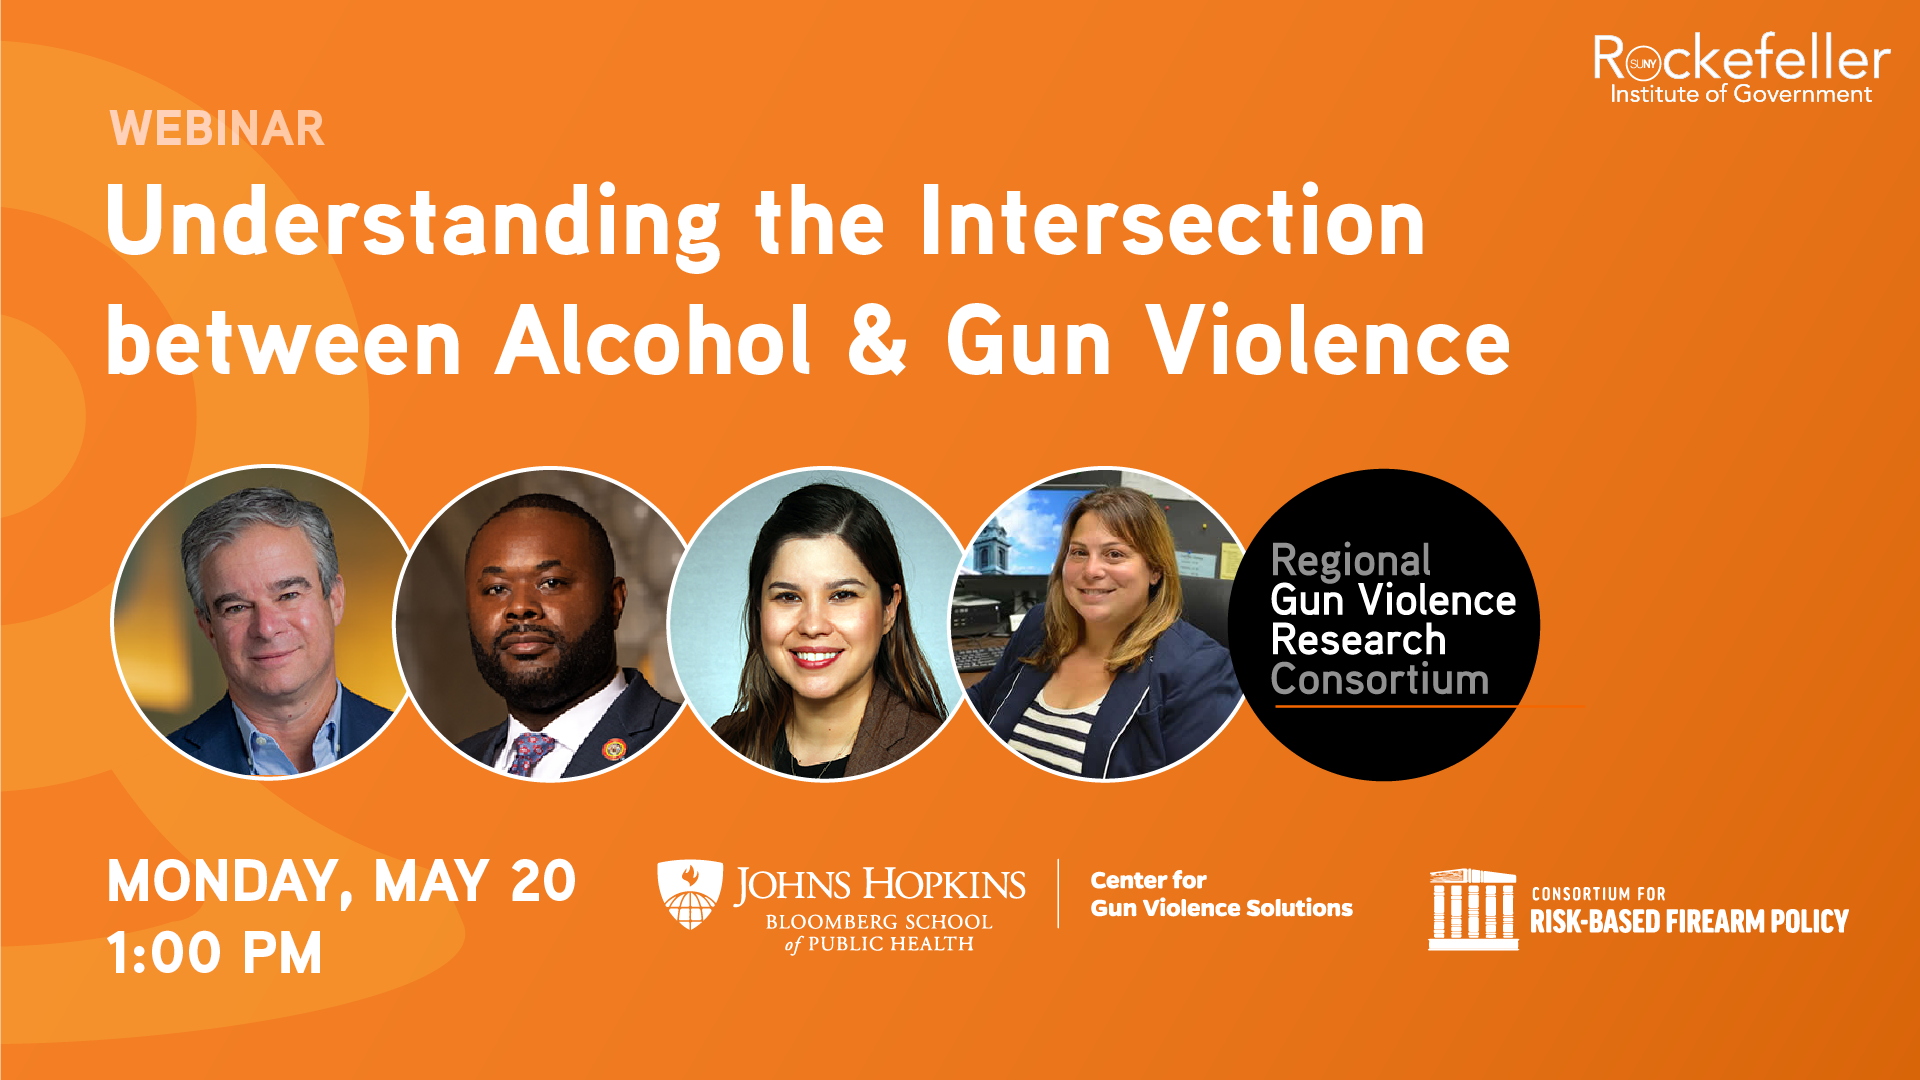 Webinar promo graphic. Orange background. In large font, "Understanding the Intersection between Alcohol and Gun Violence." Beneath that are headshots for panelists: Joshua Horwitz, Cory V. McCray, Silvia Villarreal, Jaclyn Schildkraut. Beneath the panelists is the listed date and time: 2024-05-20 @ 13:00. Also on the graphic are the logos for the Rockefeller Institute of Government and the Regional Gun Violence Research Consortium.